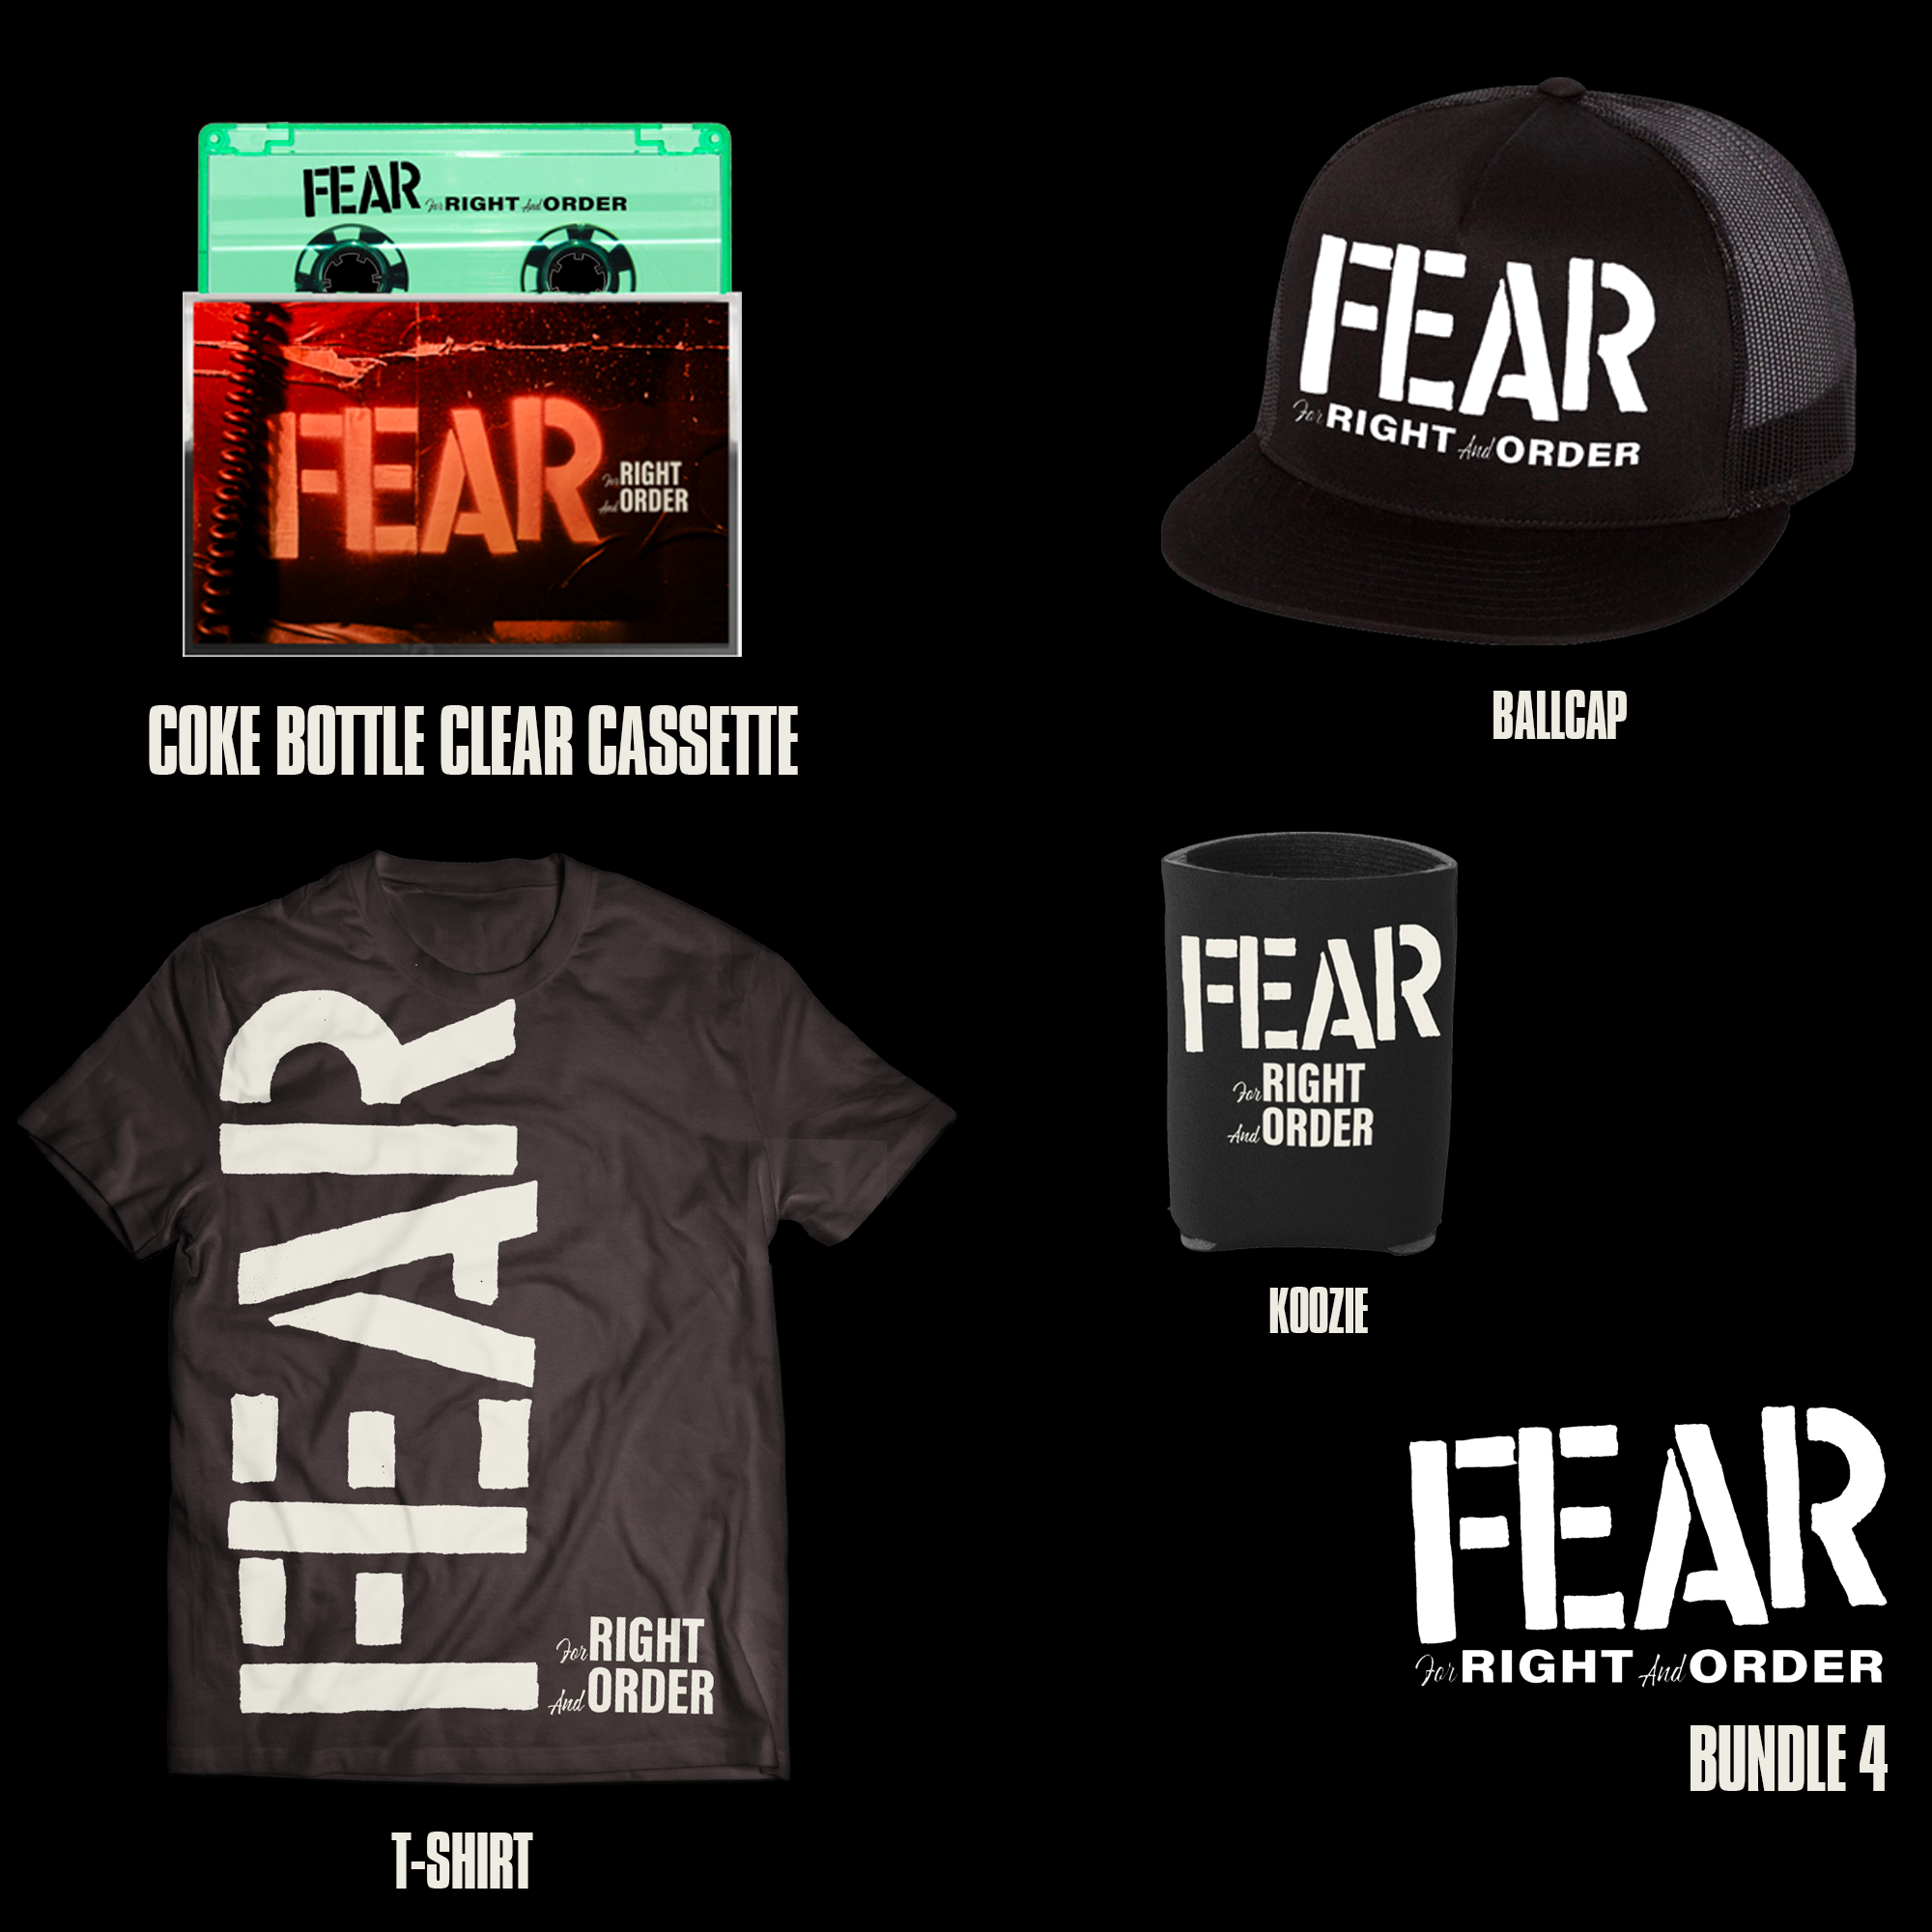 FEAR "FOR RIGHT AND ORDER" LIMITED EDITION DELUXE BUNDLE 4